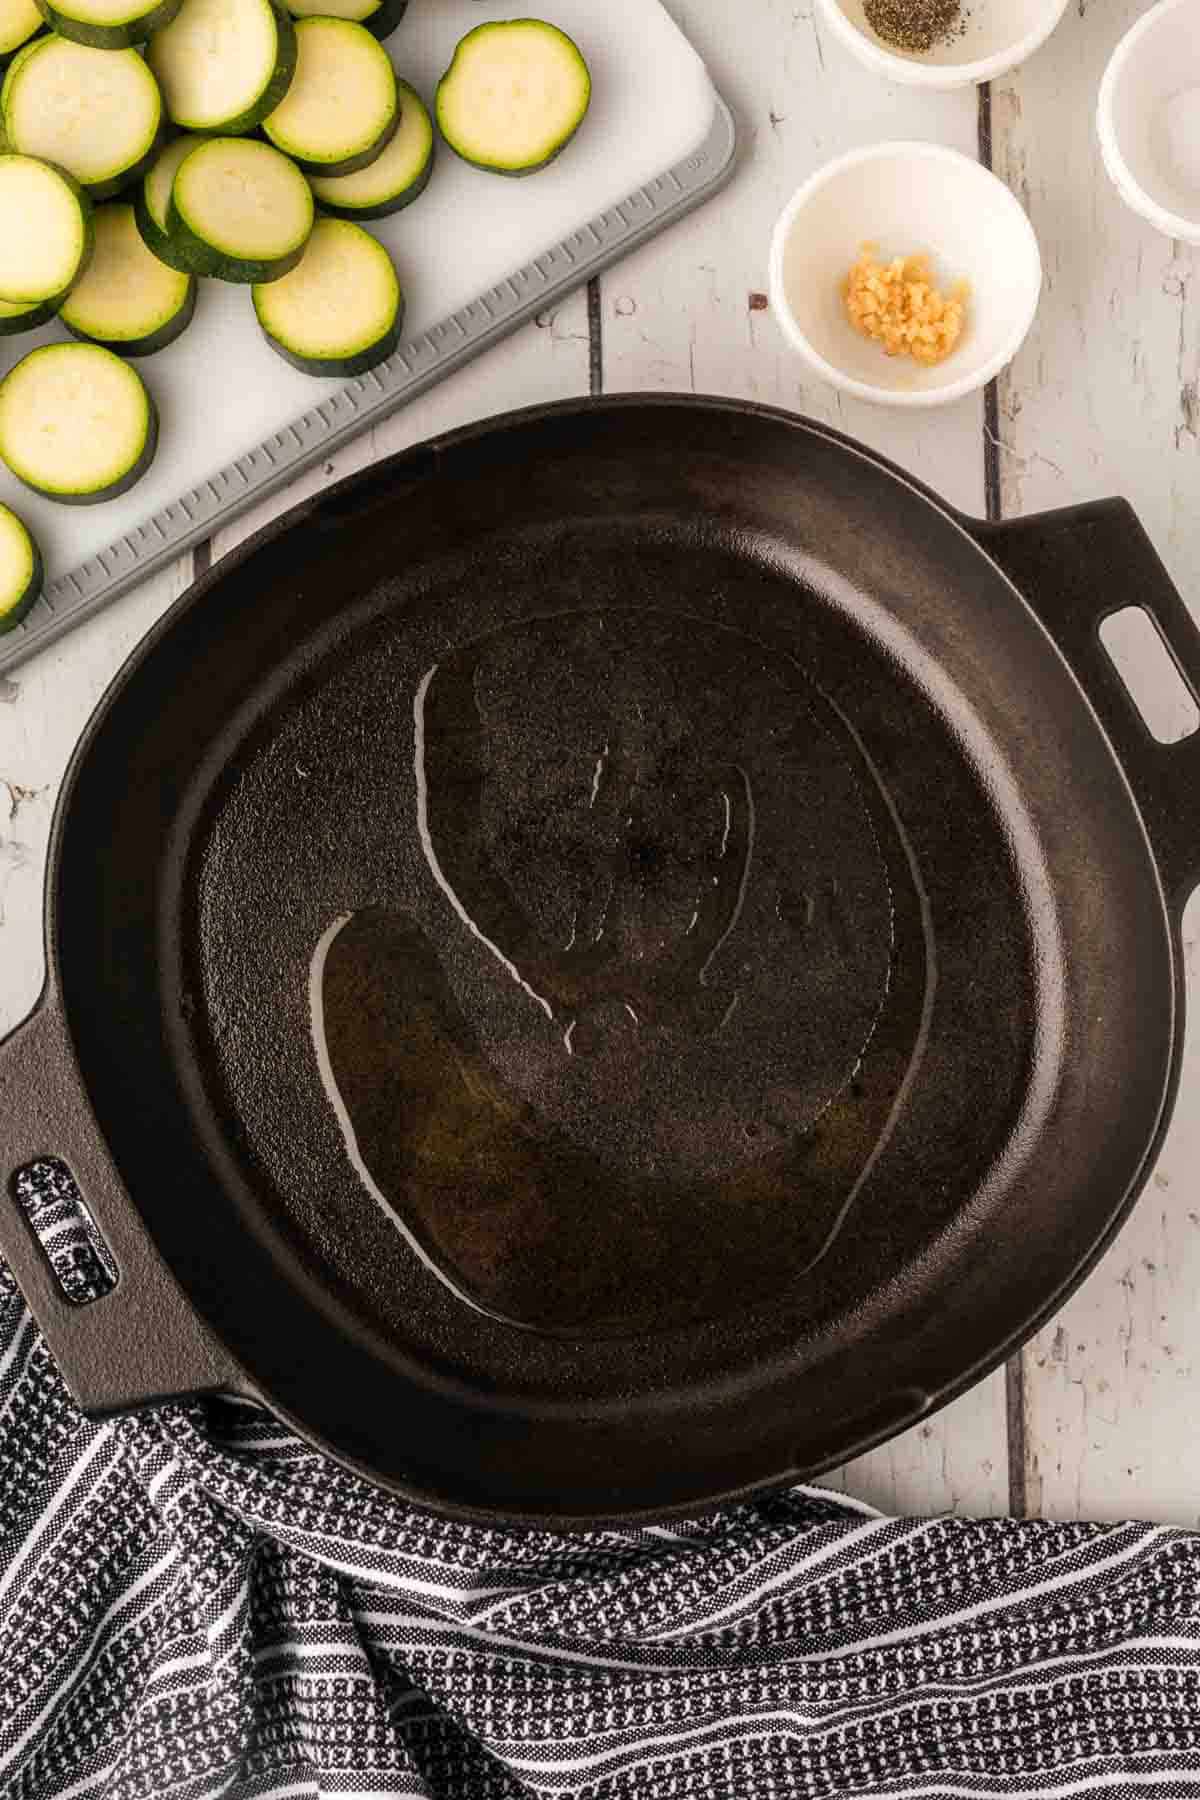 How to Cut Zucchini - The Wooden Skillet